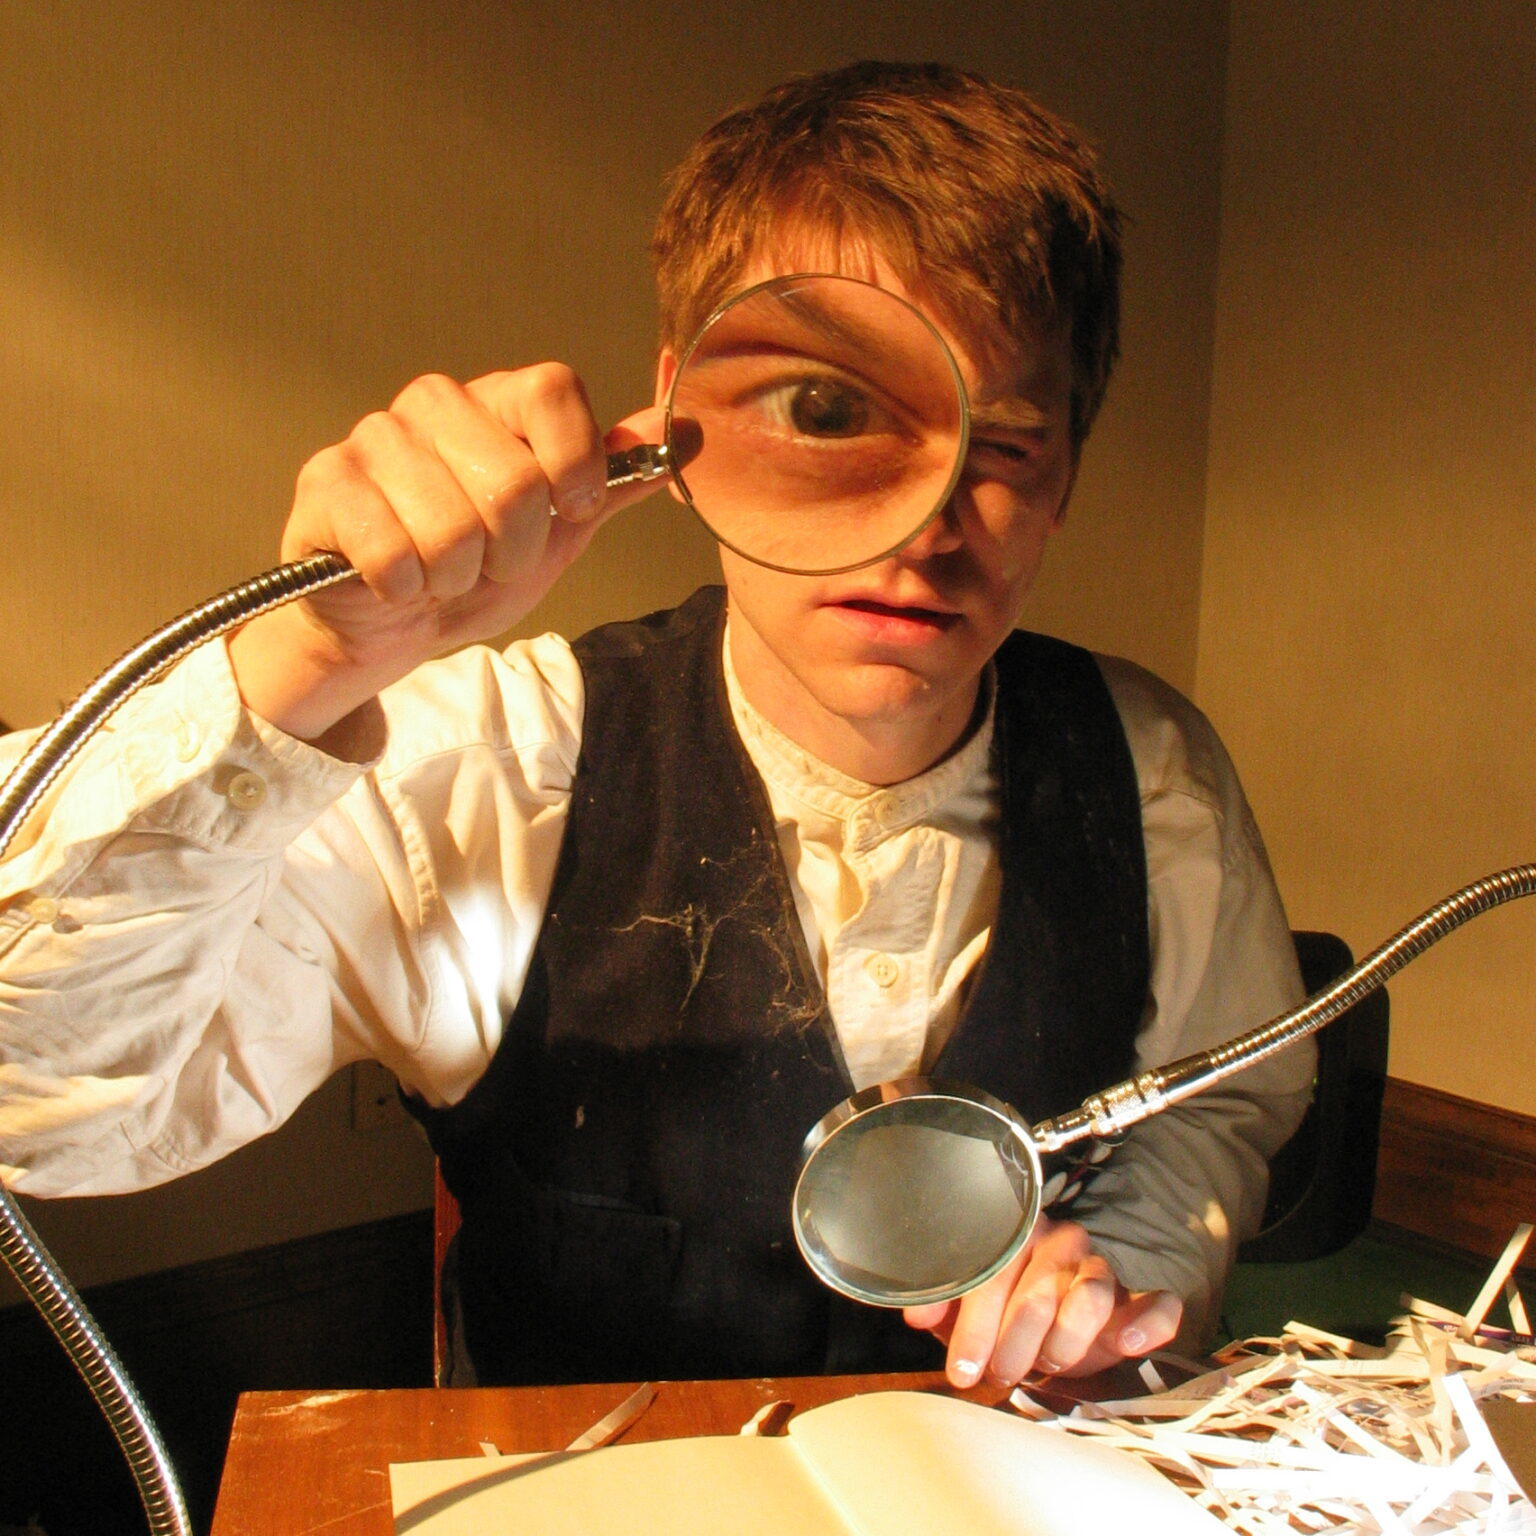 The hidden room - 2007 - boy with magnifying glass that magnifies one of his eye-